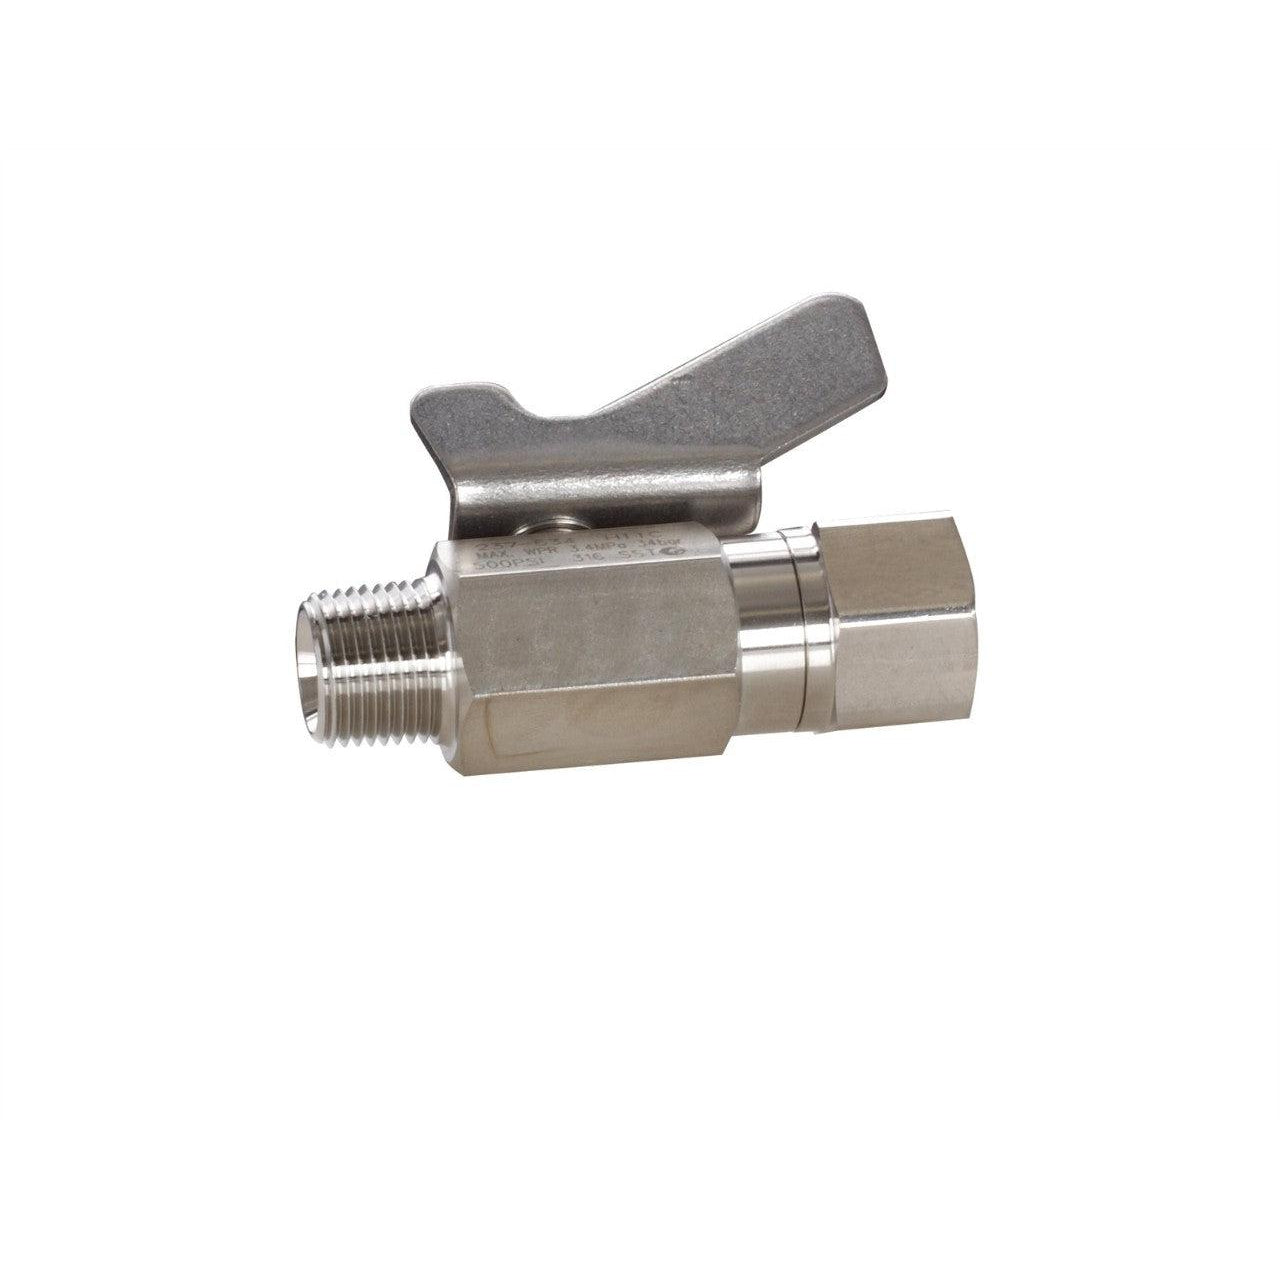 Low Pressure Ball Valve compatible with stainless steel, catalyst and waterborne materials, 3/8 in. npt(f) x 3/8 in. npt(m)